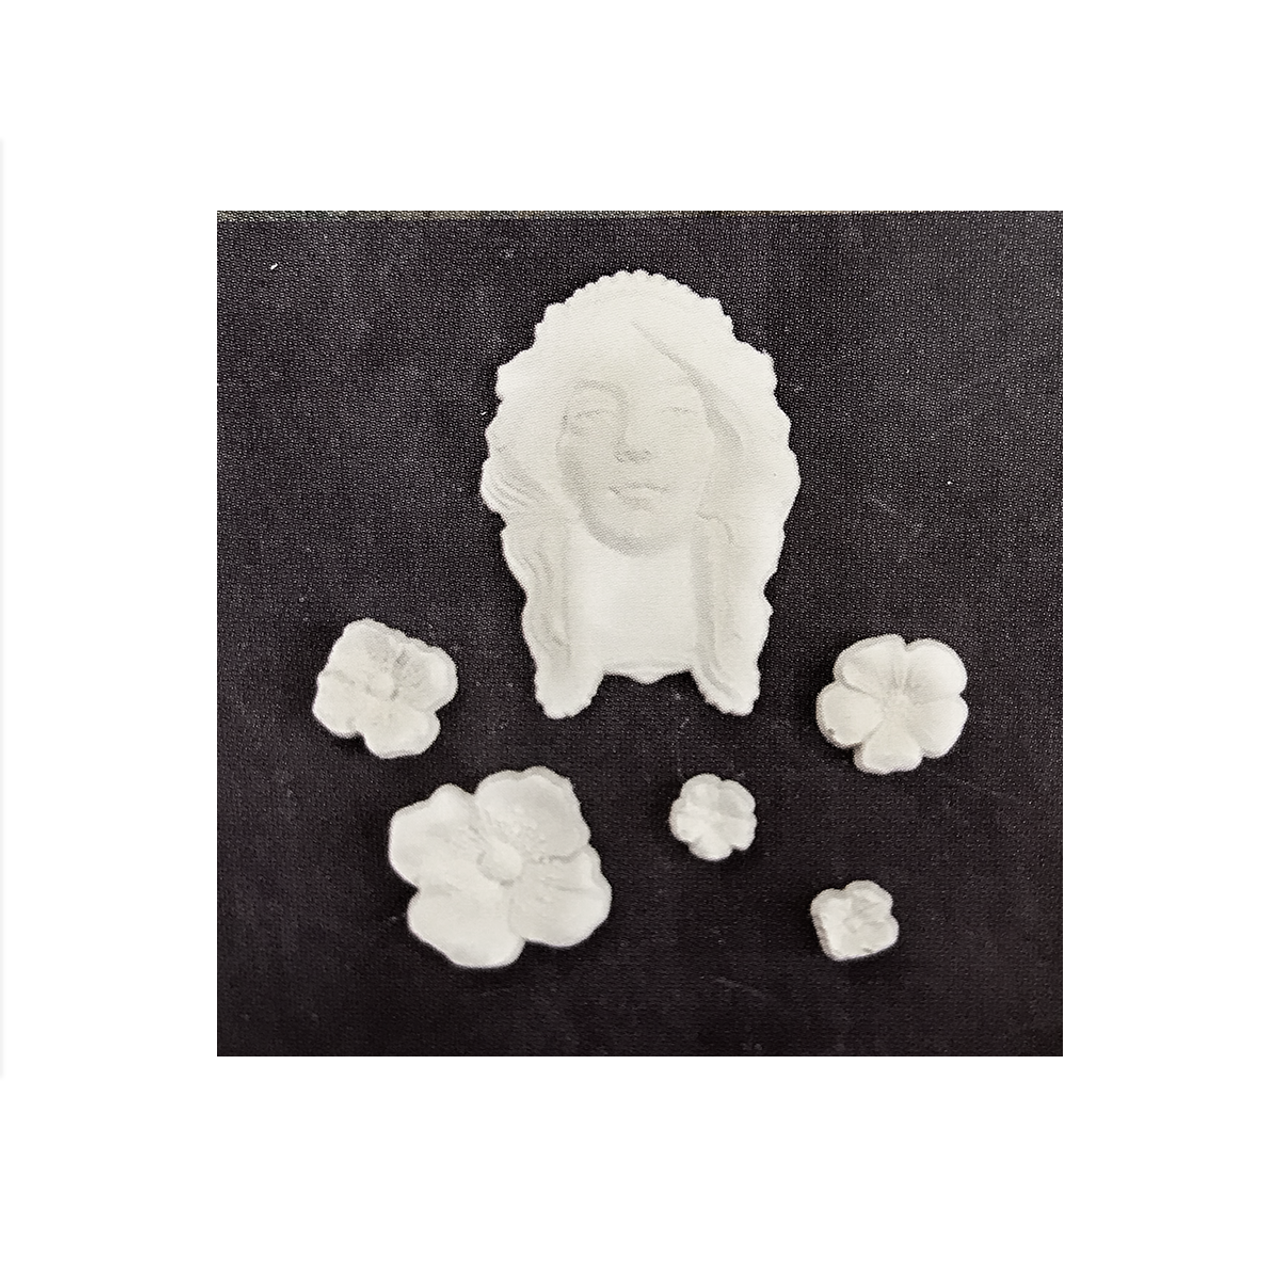 Example items moulded with Imaginarium Flower Queen mould